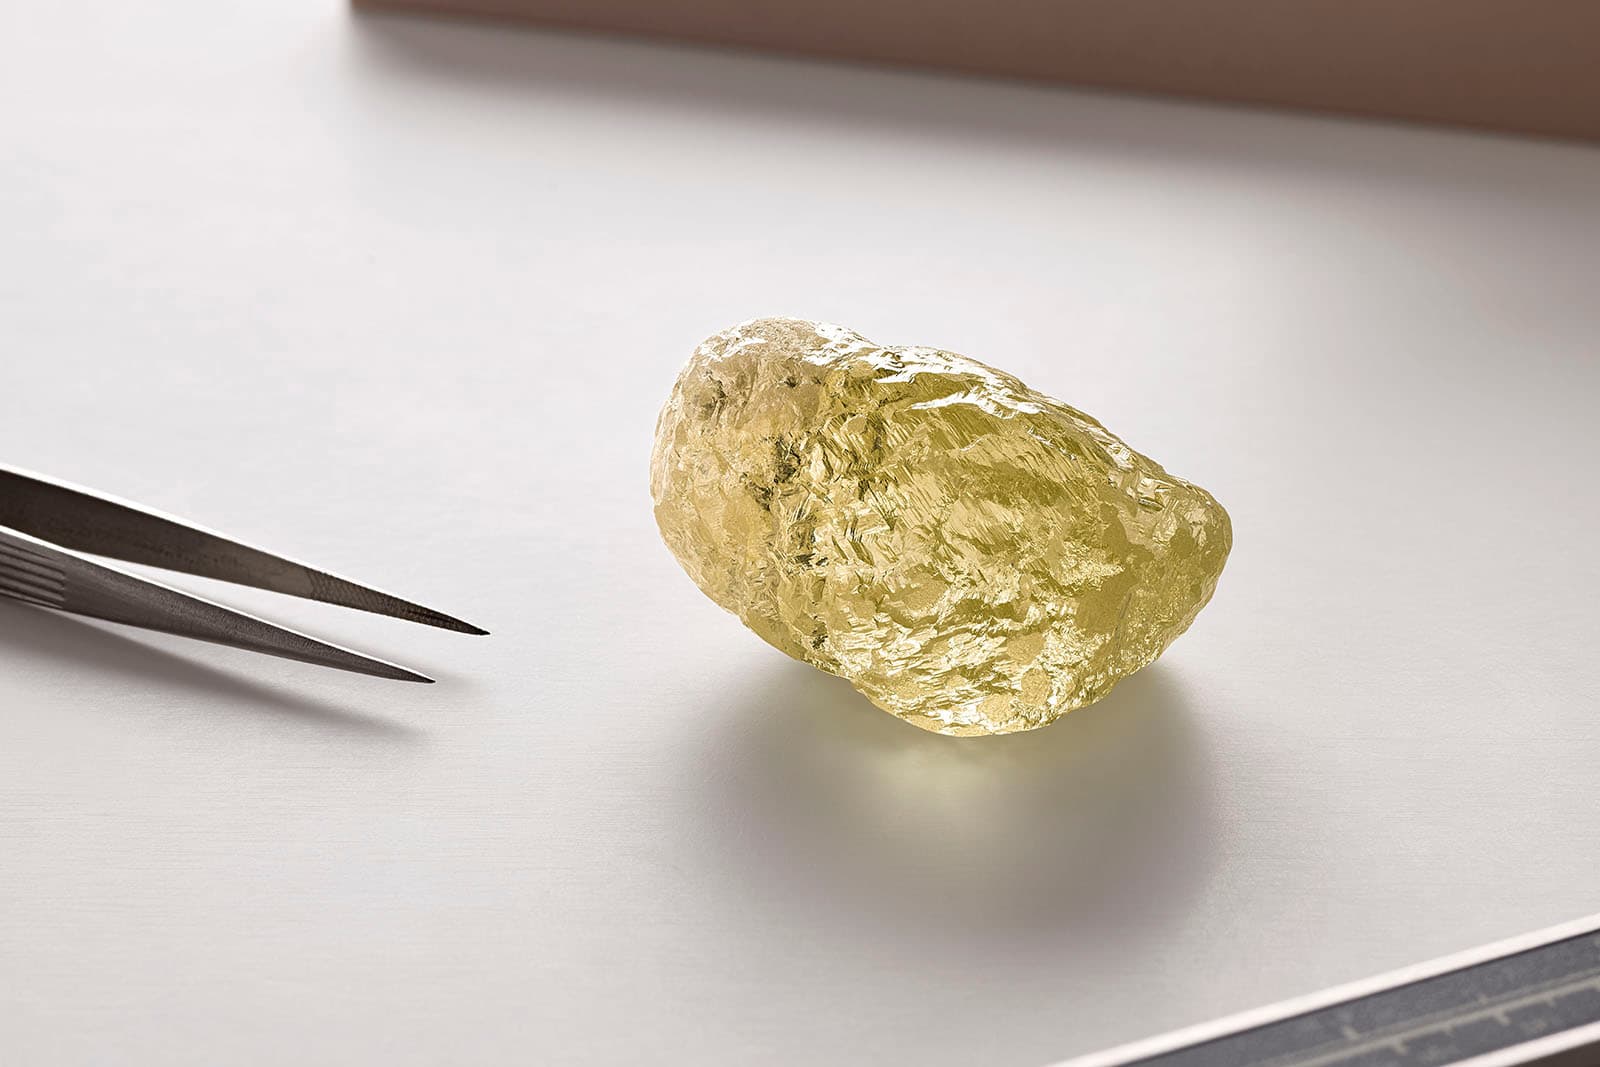 The 552-carat Diavik diamond - the largest diamond ever discovered in North America